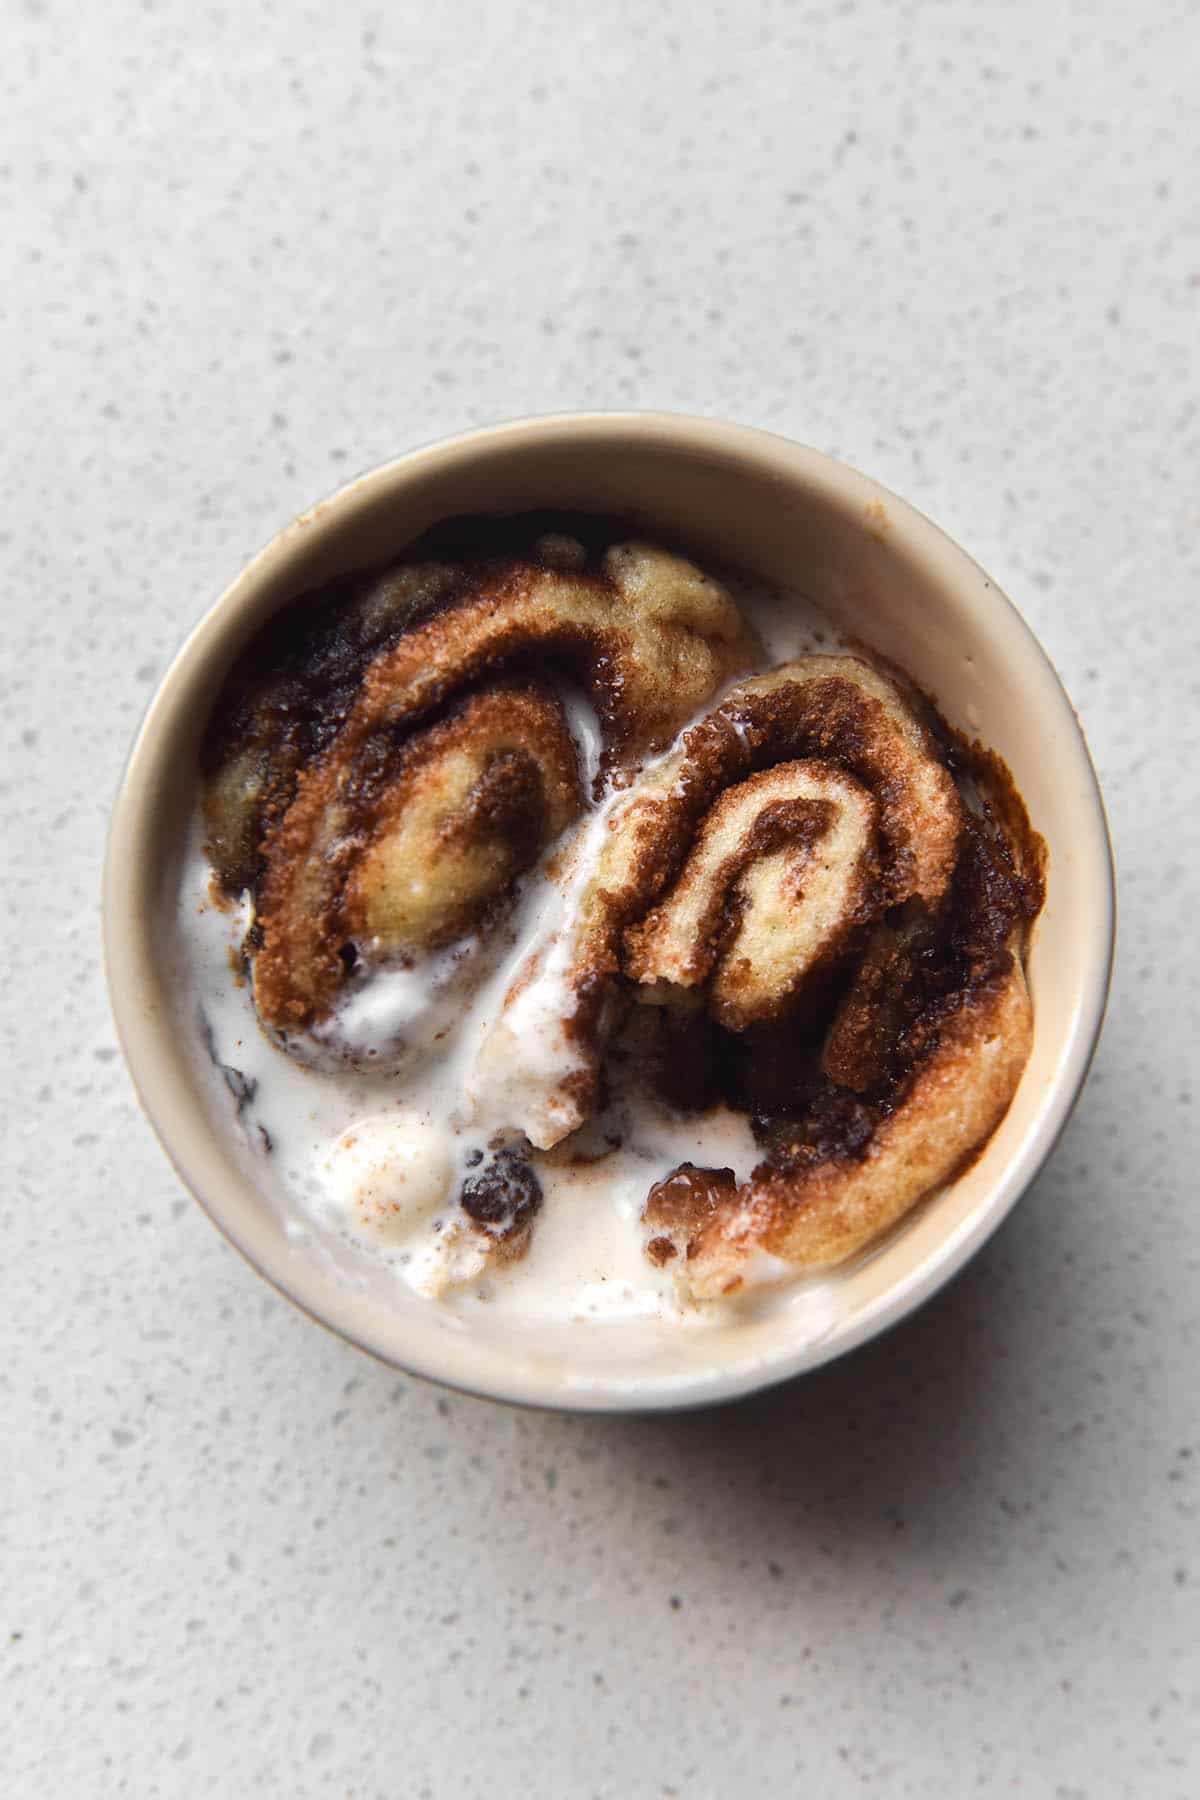 An aerial close up view of a gluten-free vegan microwave cinnamon scroll. The scroll has been cooked in a beige ramekin, which sits atop a white kitchen counter. There are two scrolls snuggled into the dish and are topped with a small scoop of melted vanilla ice cream